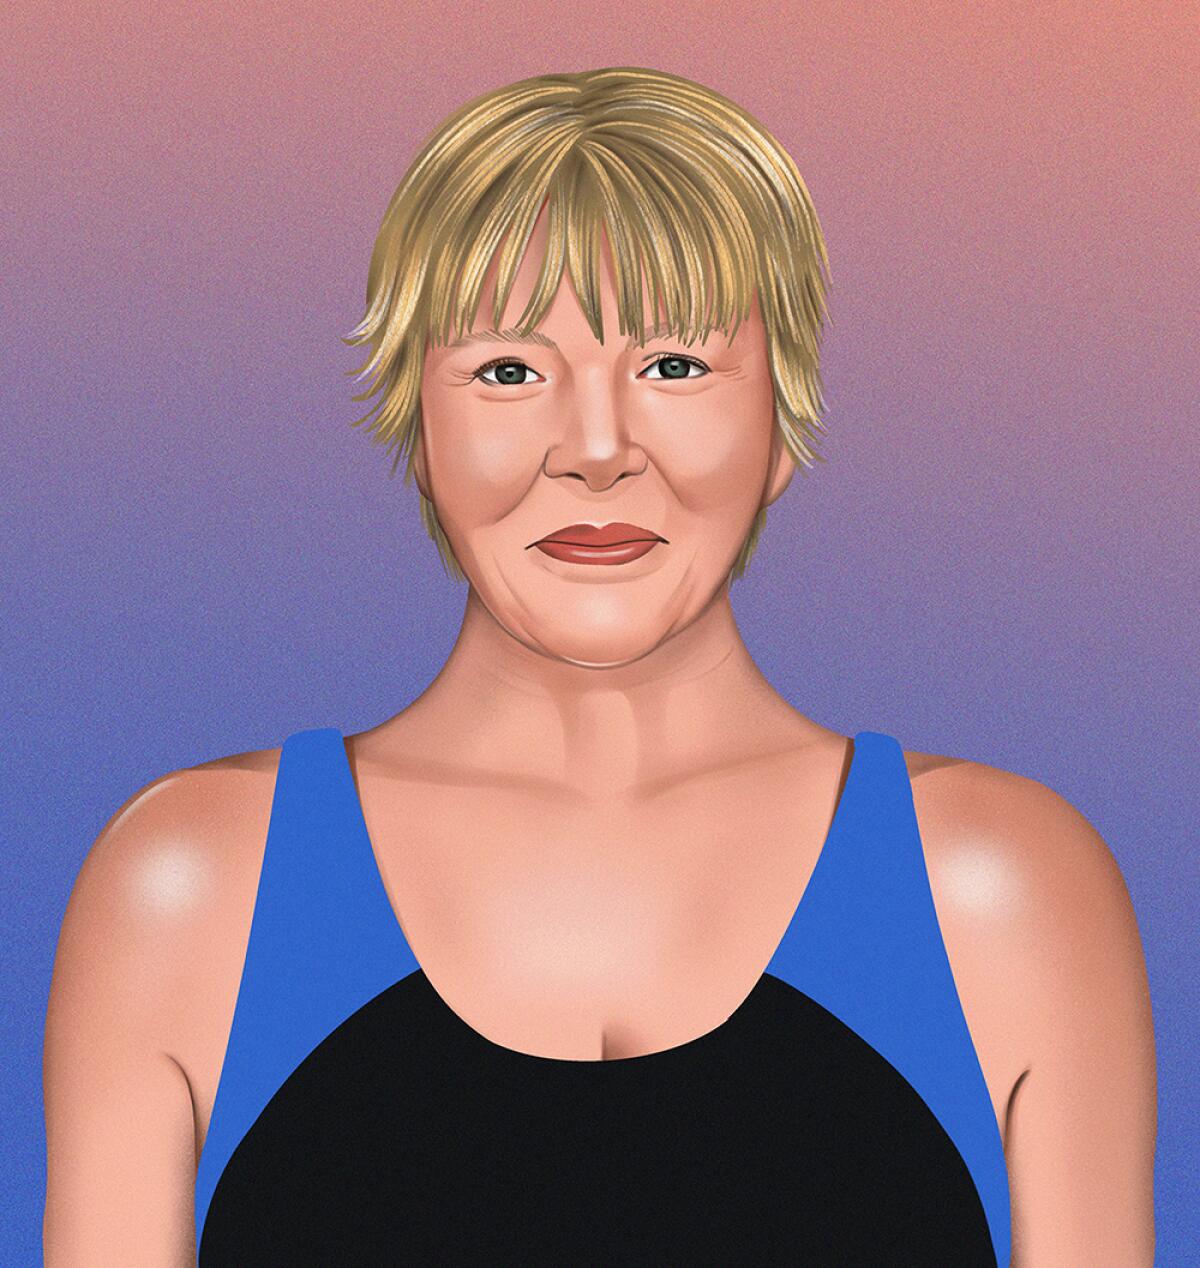 Illustration of Annette Bening in a swimsuit looking like her title character in "Nyad."